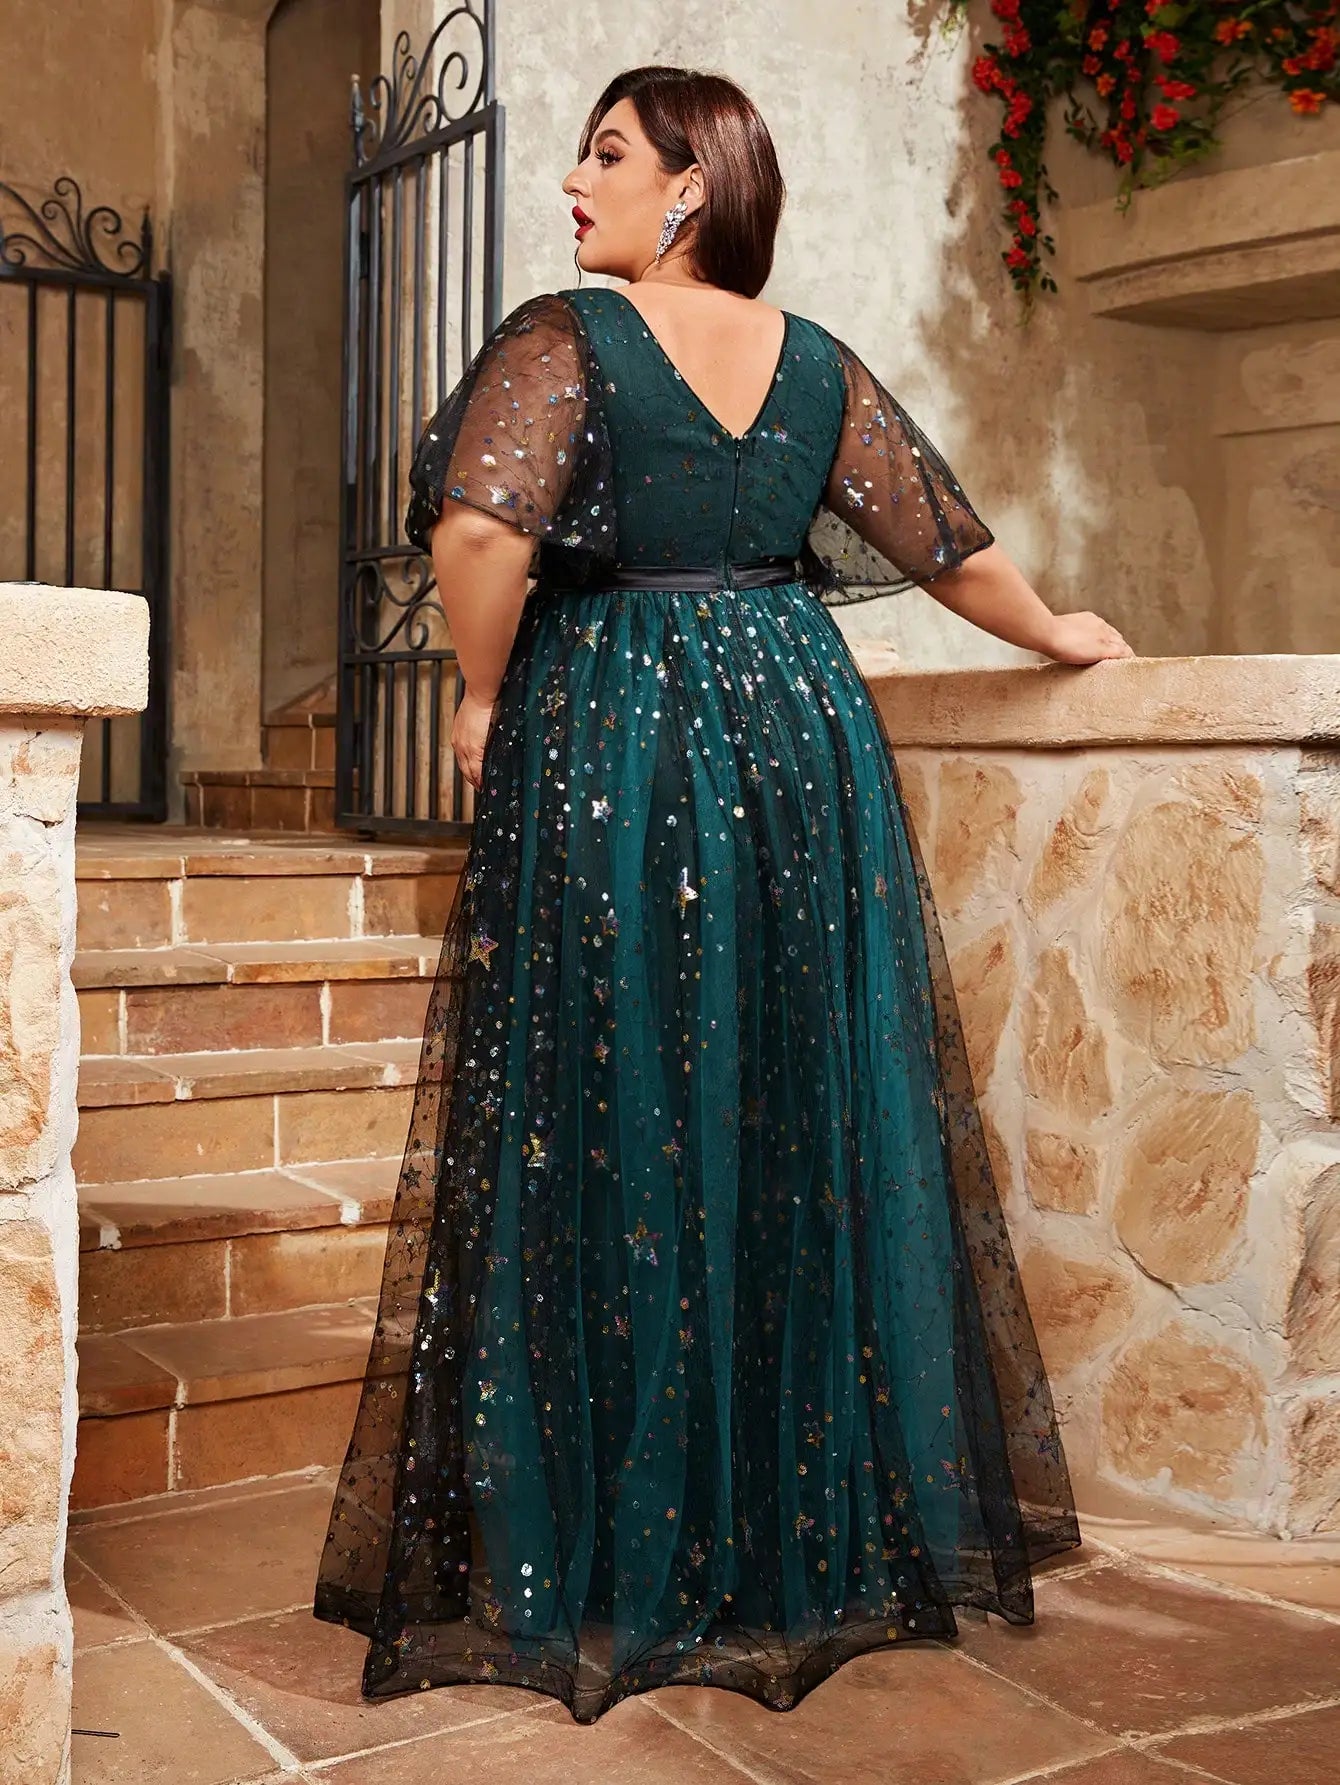 Mgiacy plus size V-neck sequin embroidered contrasting double mesh full skirt Evening gown Ball dress Party dress